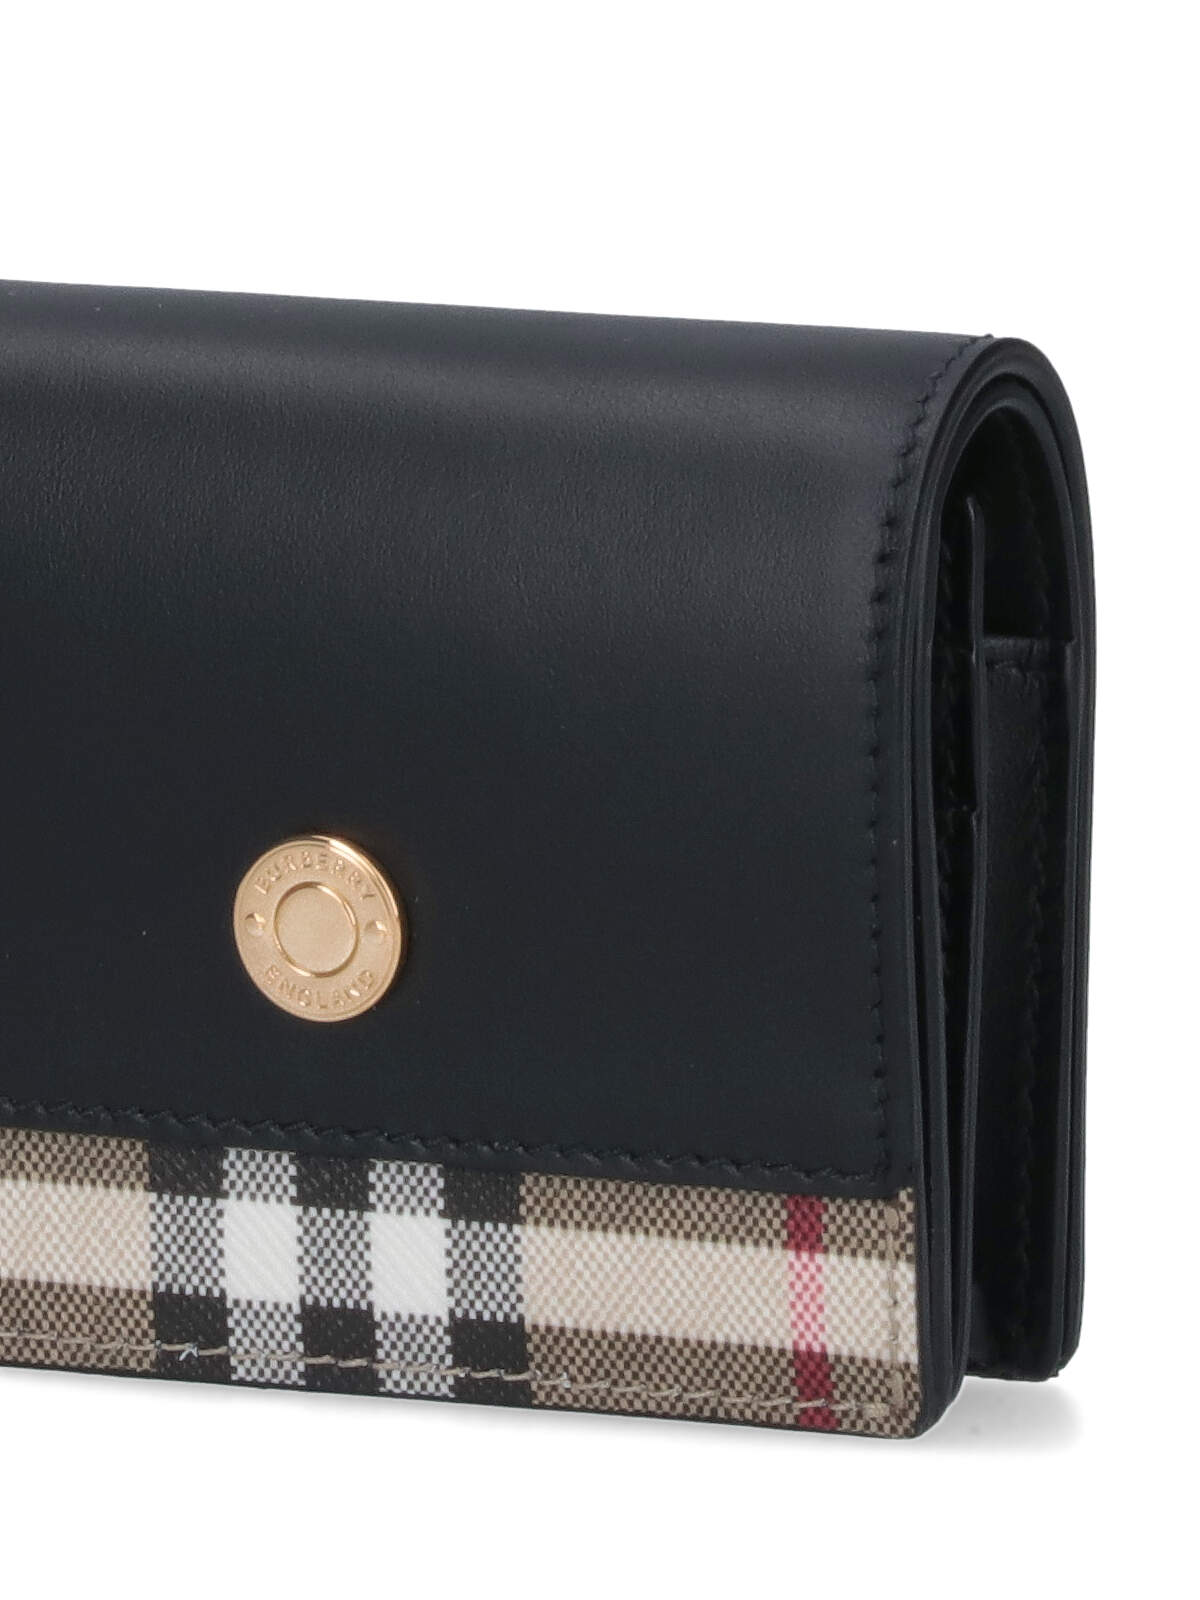 Shop Burberry Check Wallet In Black